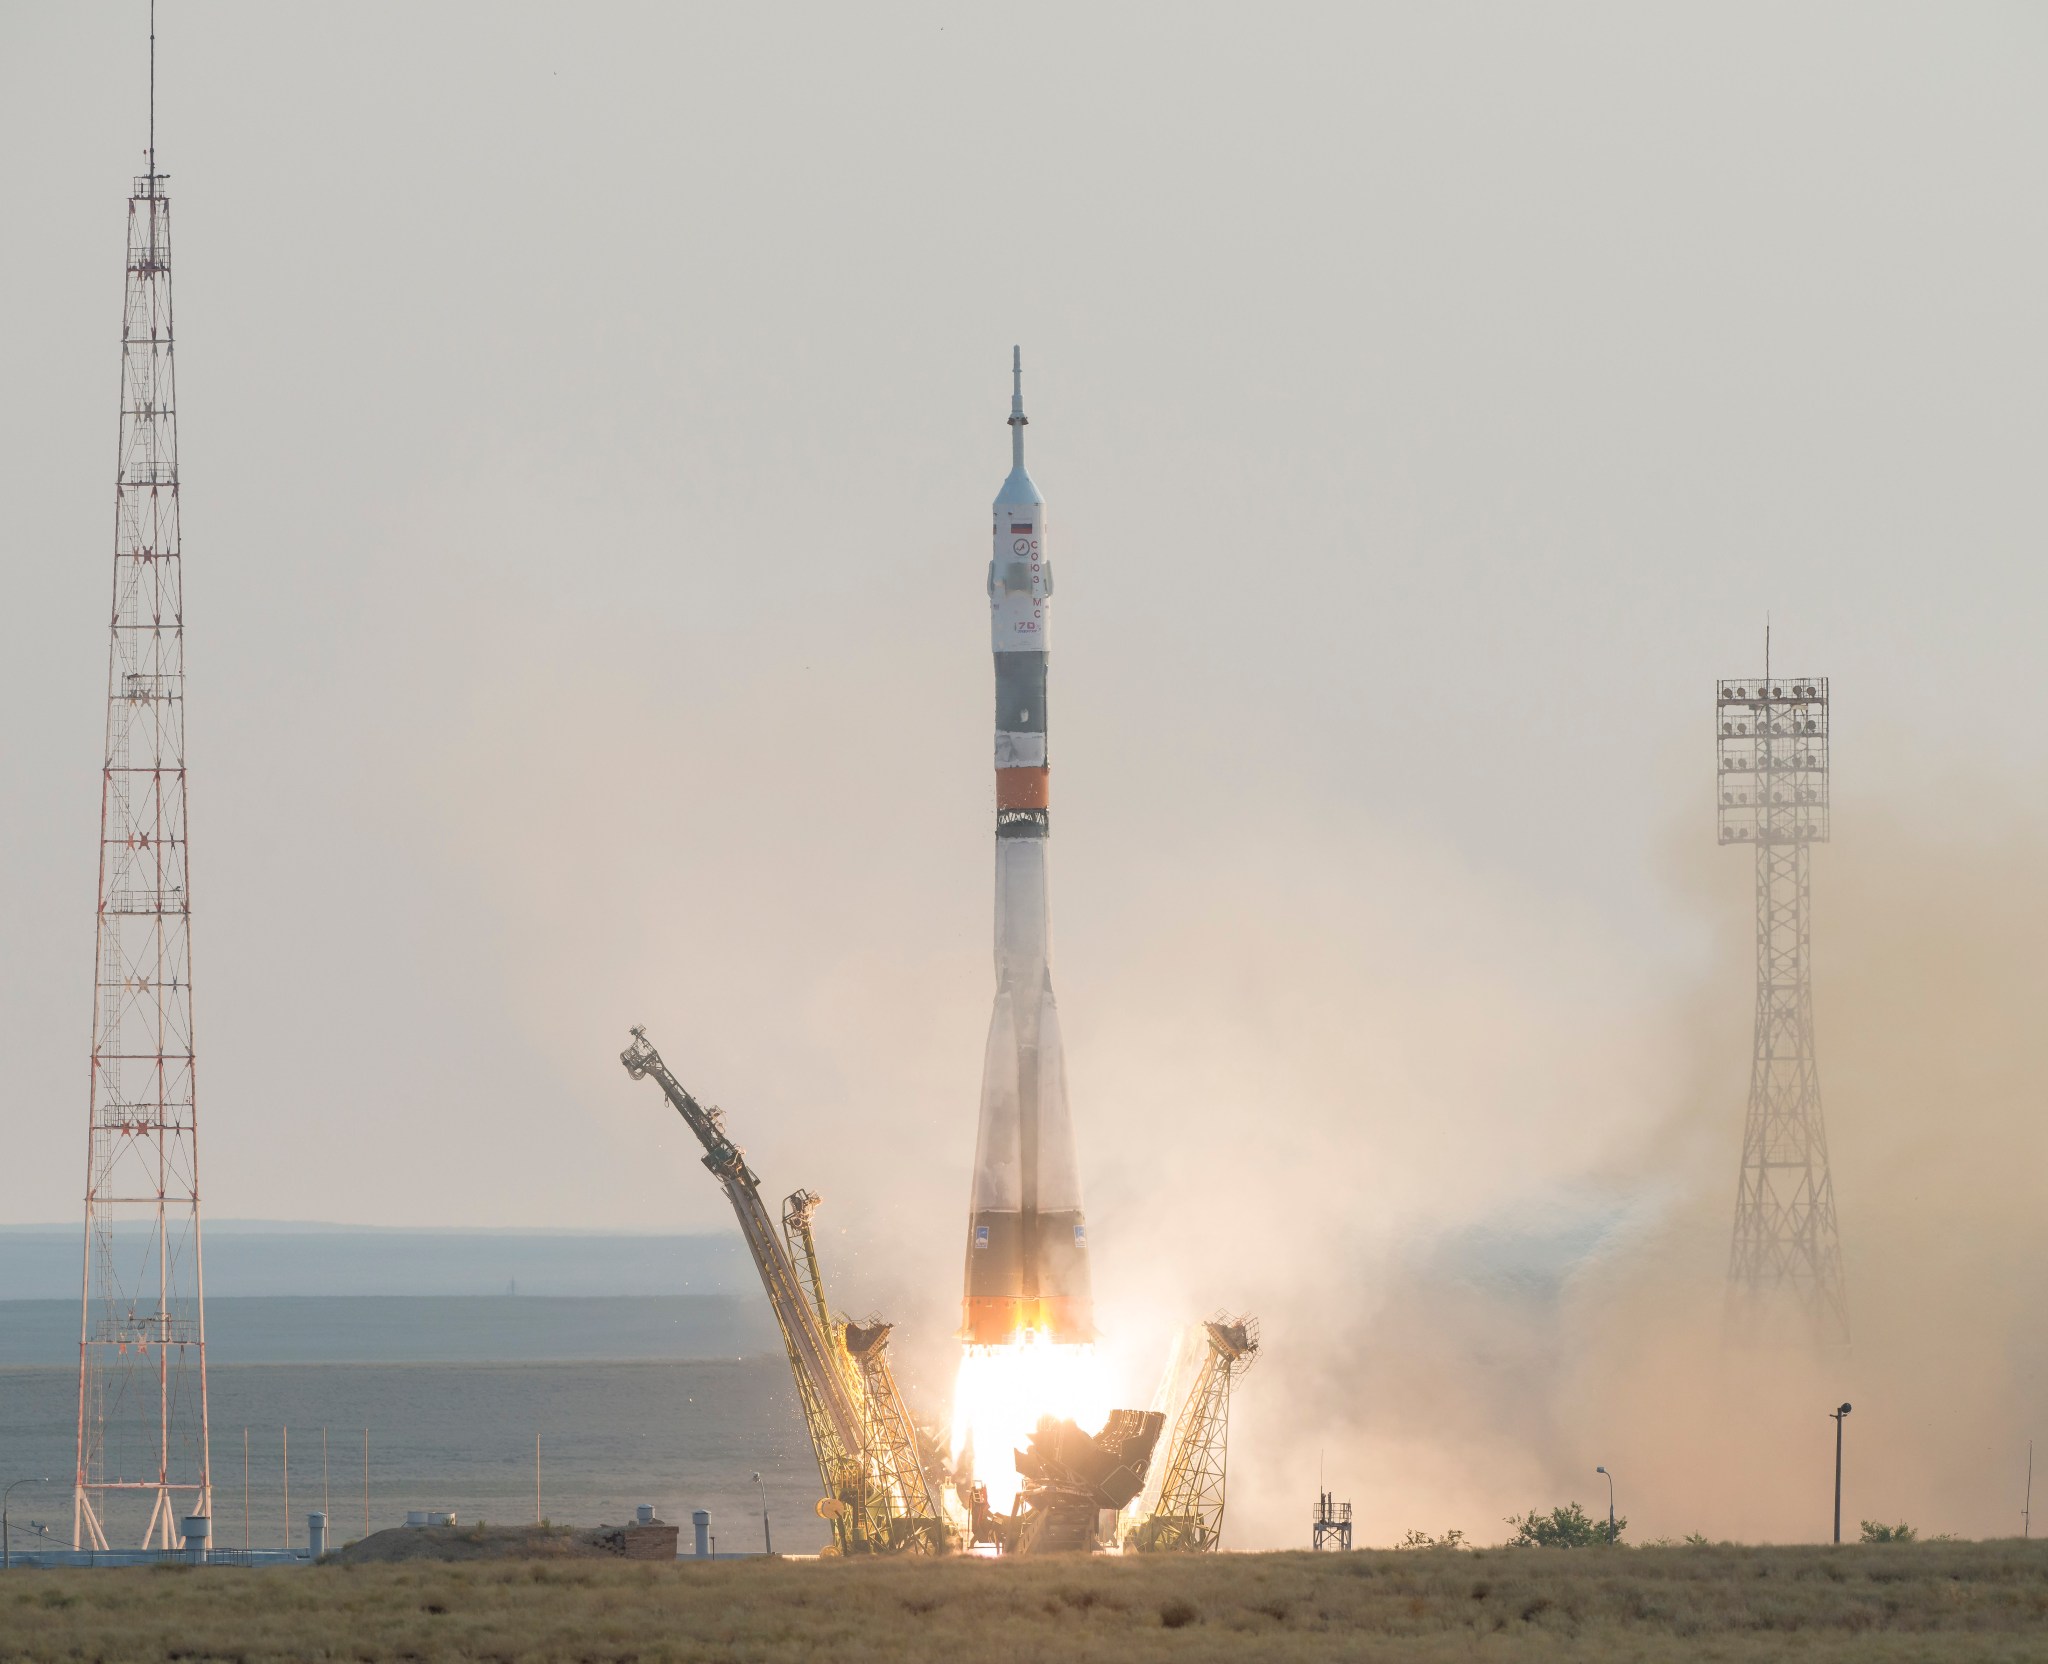 The Soyuz MS-01 spacecraft launches from the Baikonur Cosmodrome in Kazakhstan at 9:36 p.m. EDT Wednesday, July 6, 2016.